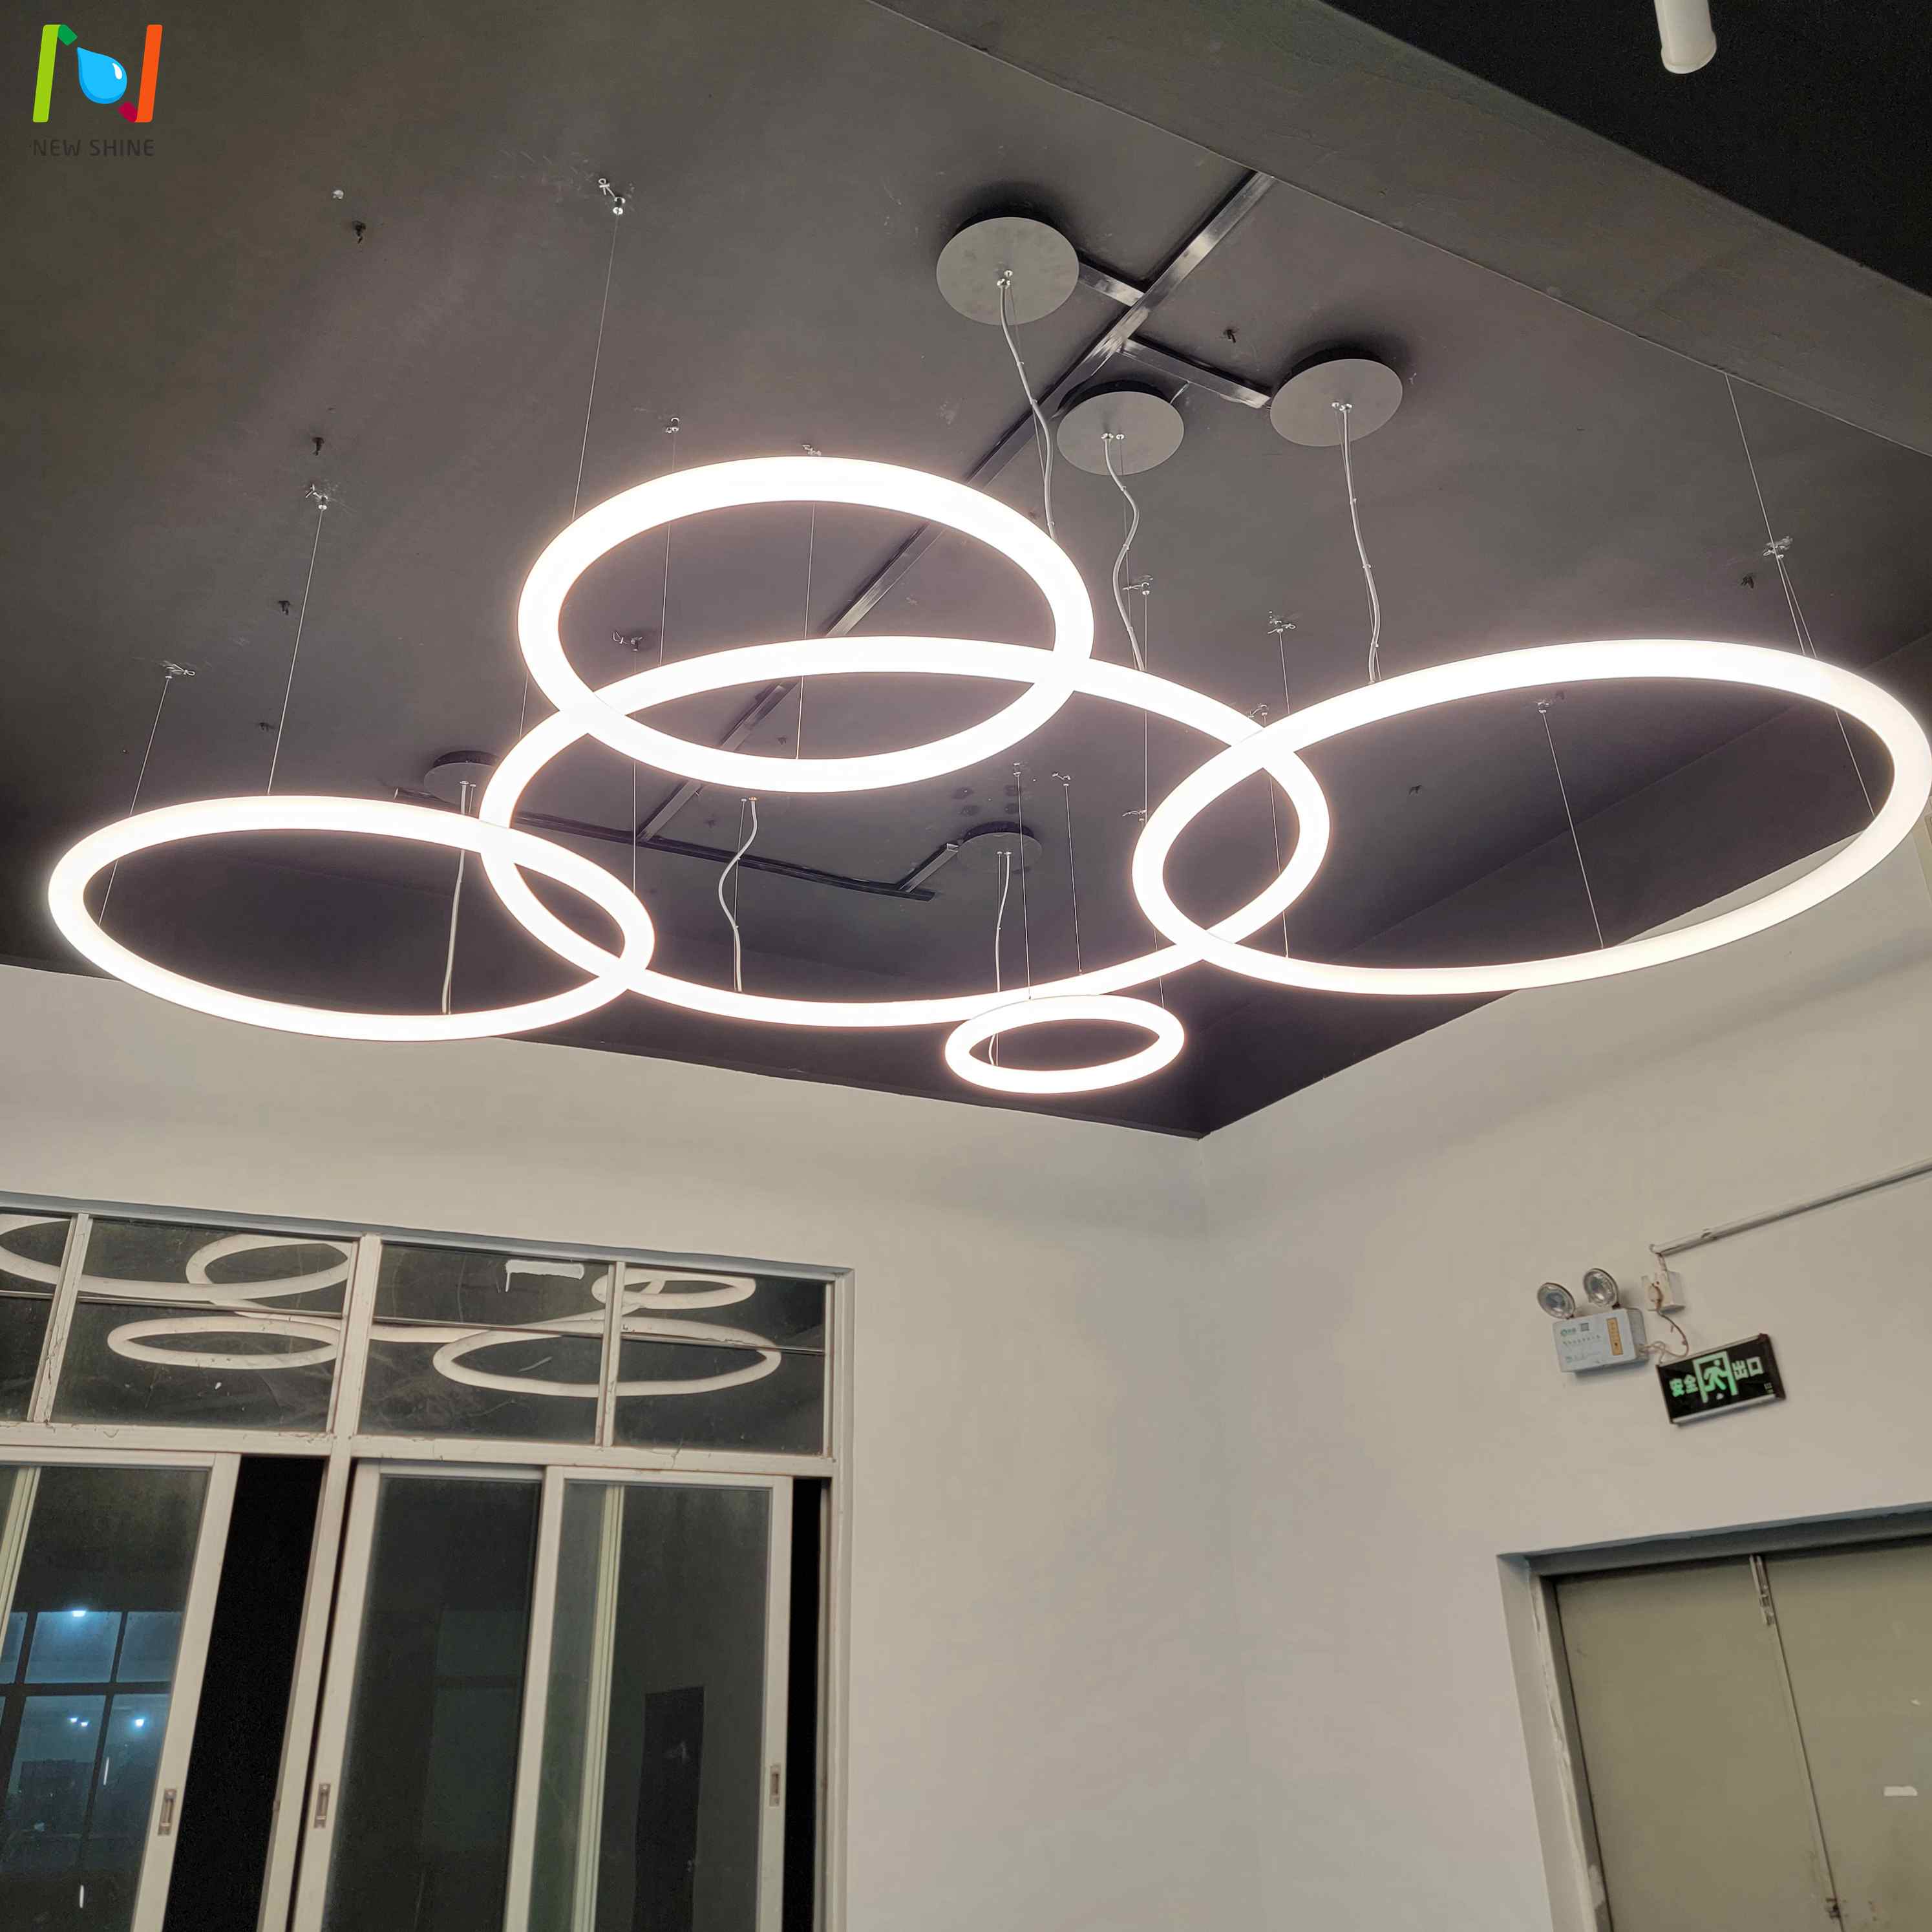 360 Emmting Donut Light Architectural Lighting Solutions LL0175S-100W